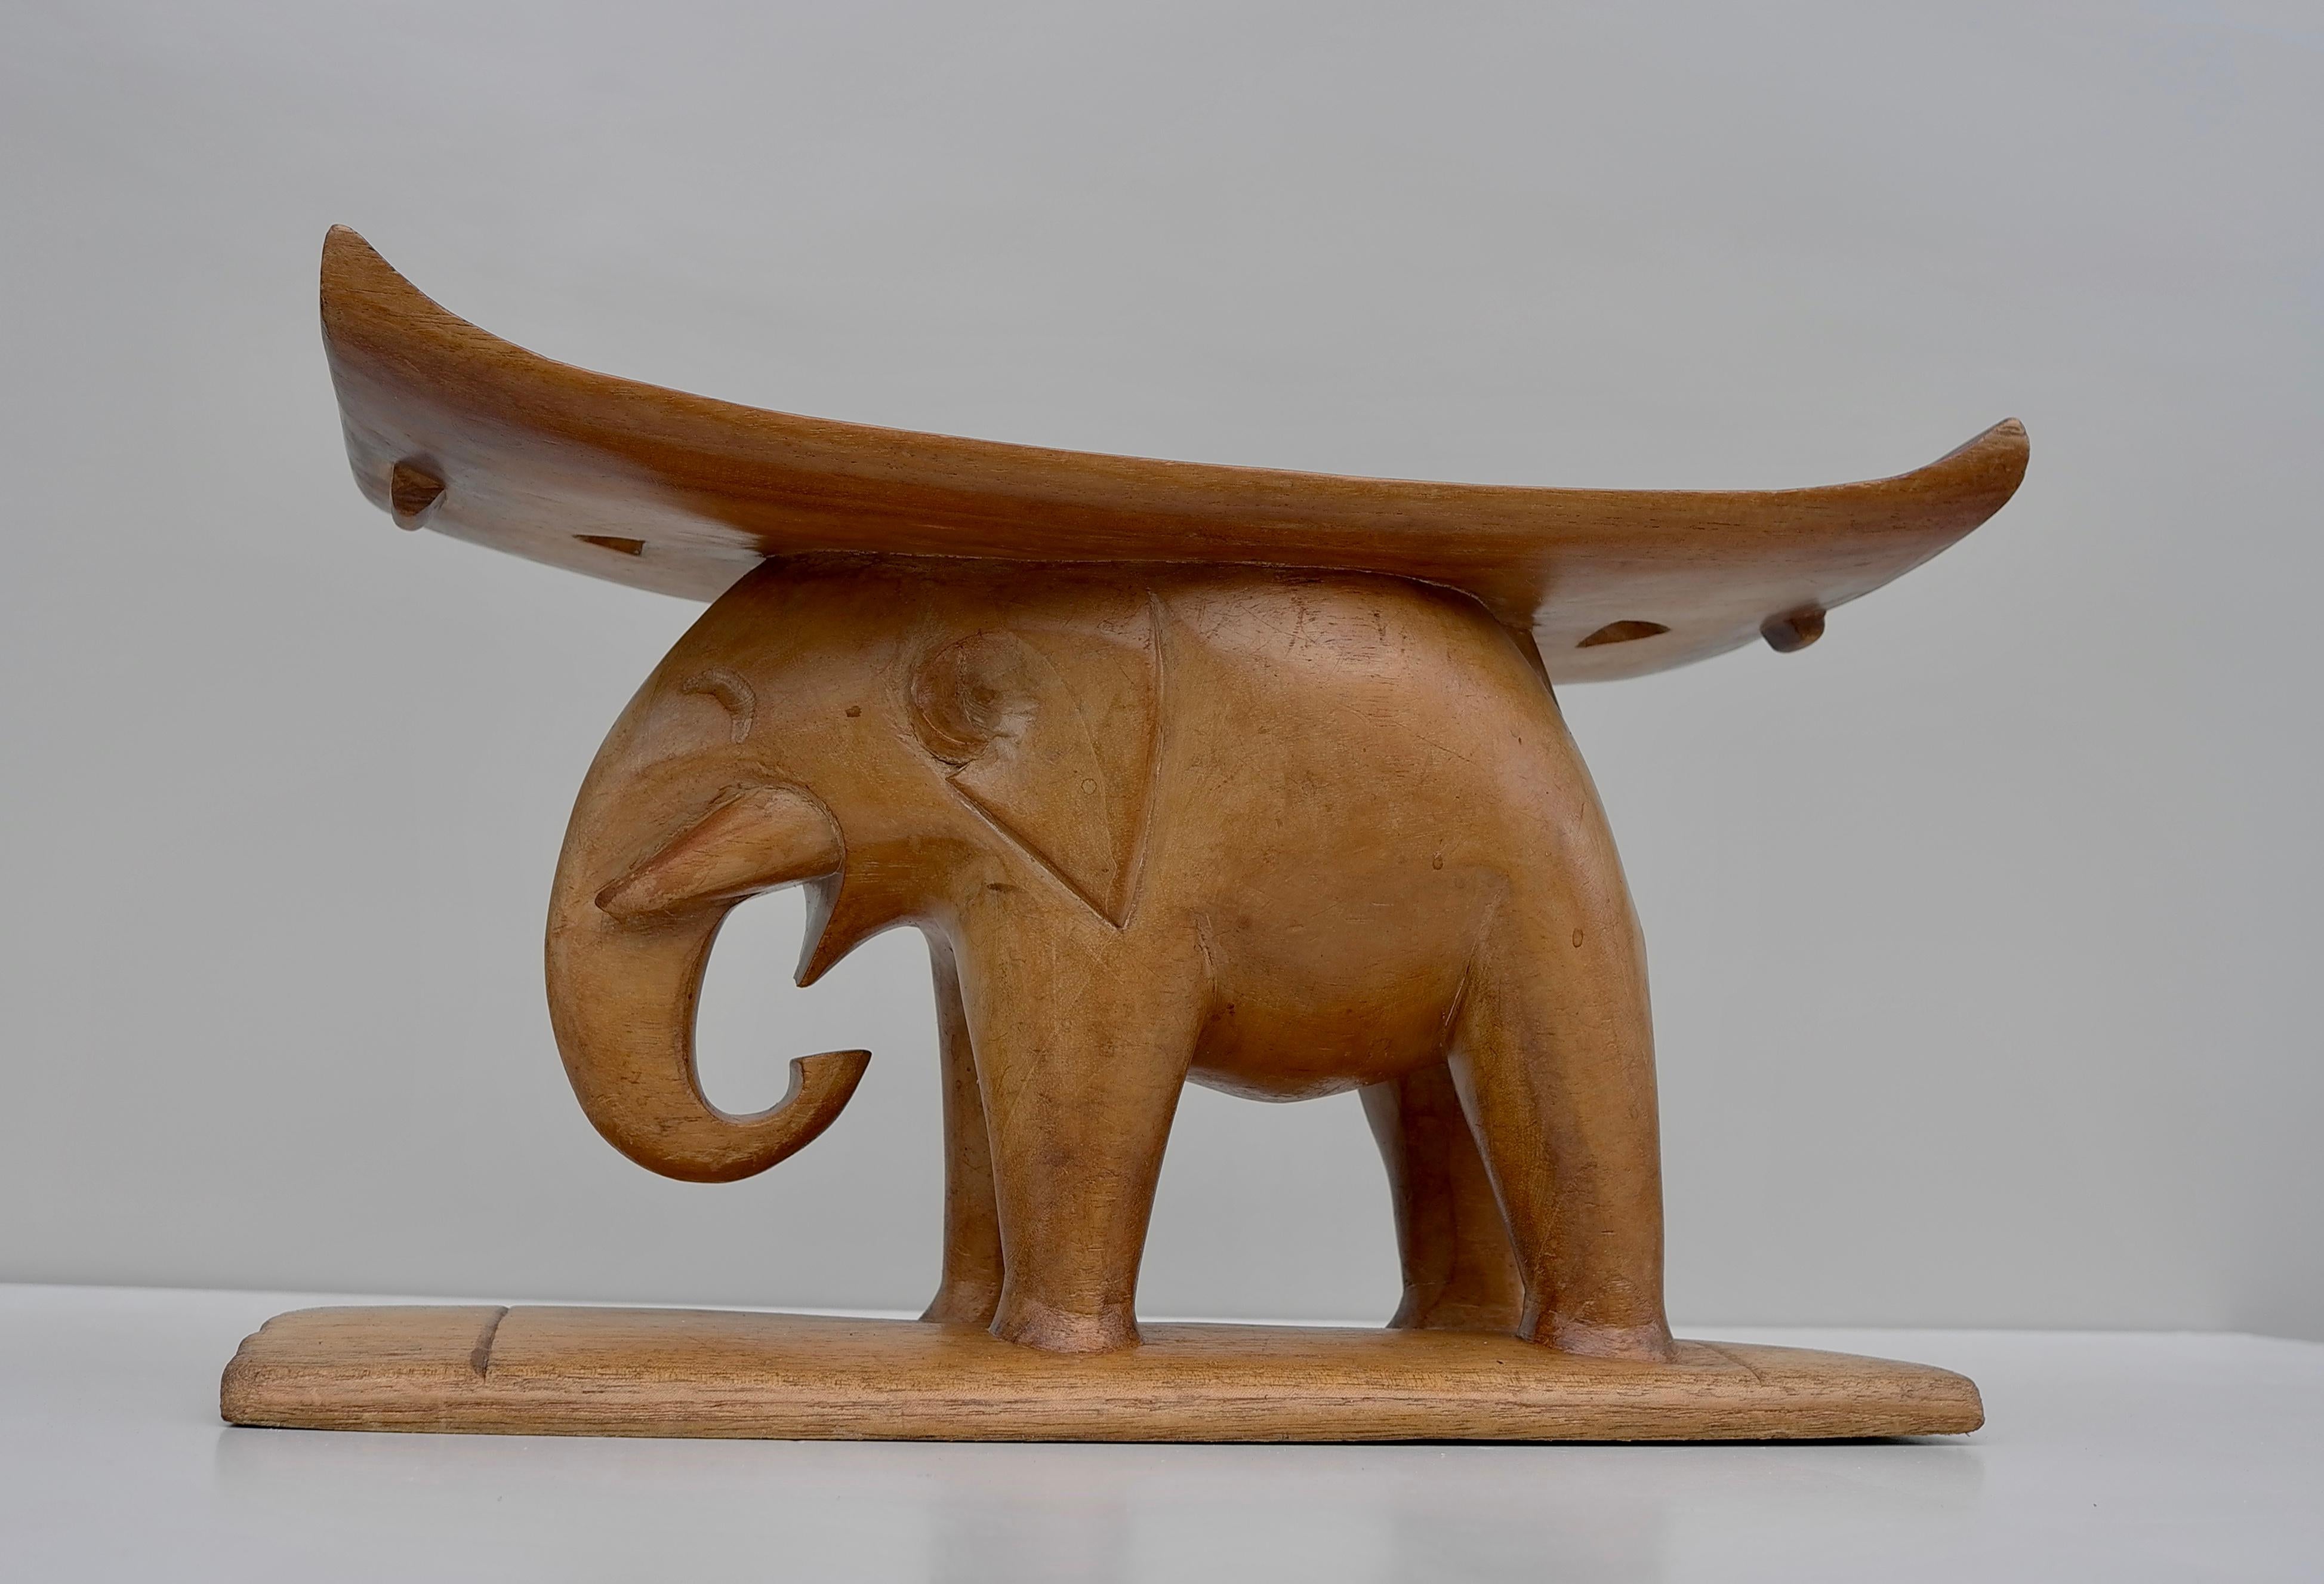 Authentic African carved wooden elephant stool. Originates from the Ashanti Tribe of Ghana. It is of traditional form with the elephant stood on a flat base with a curved seat on his back. It is excellent quality and the detail of carving around his